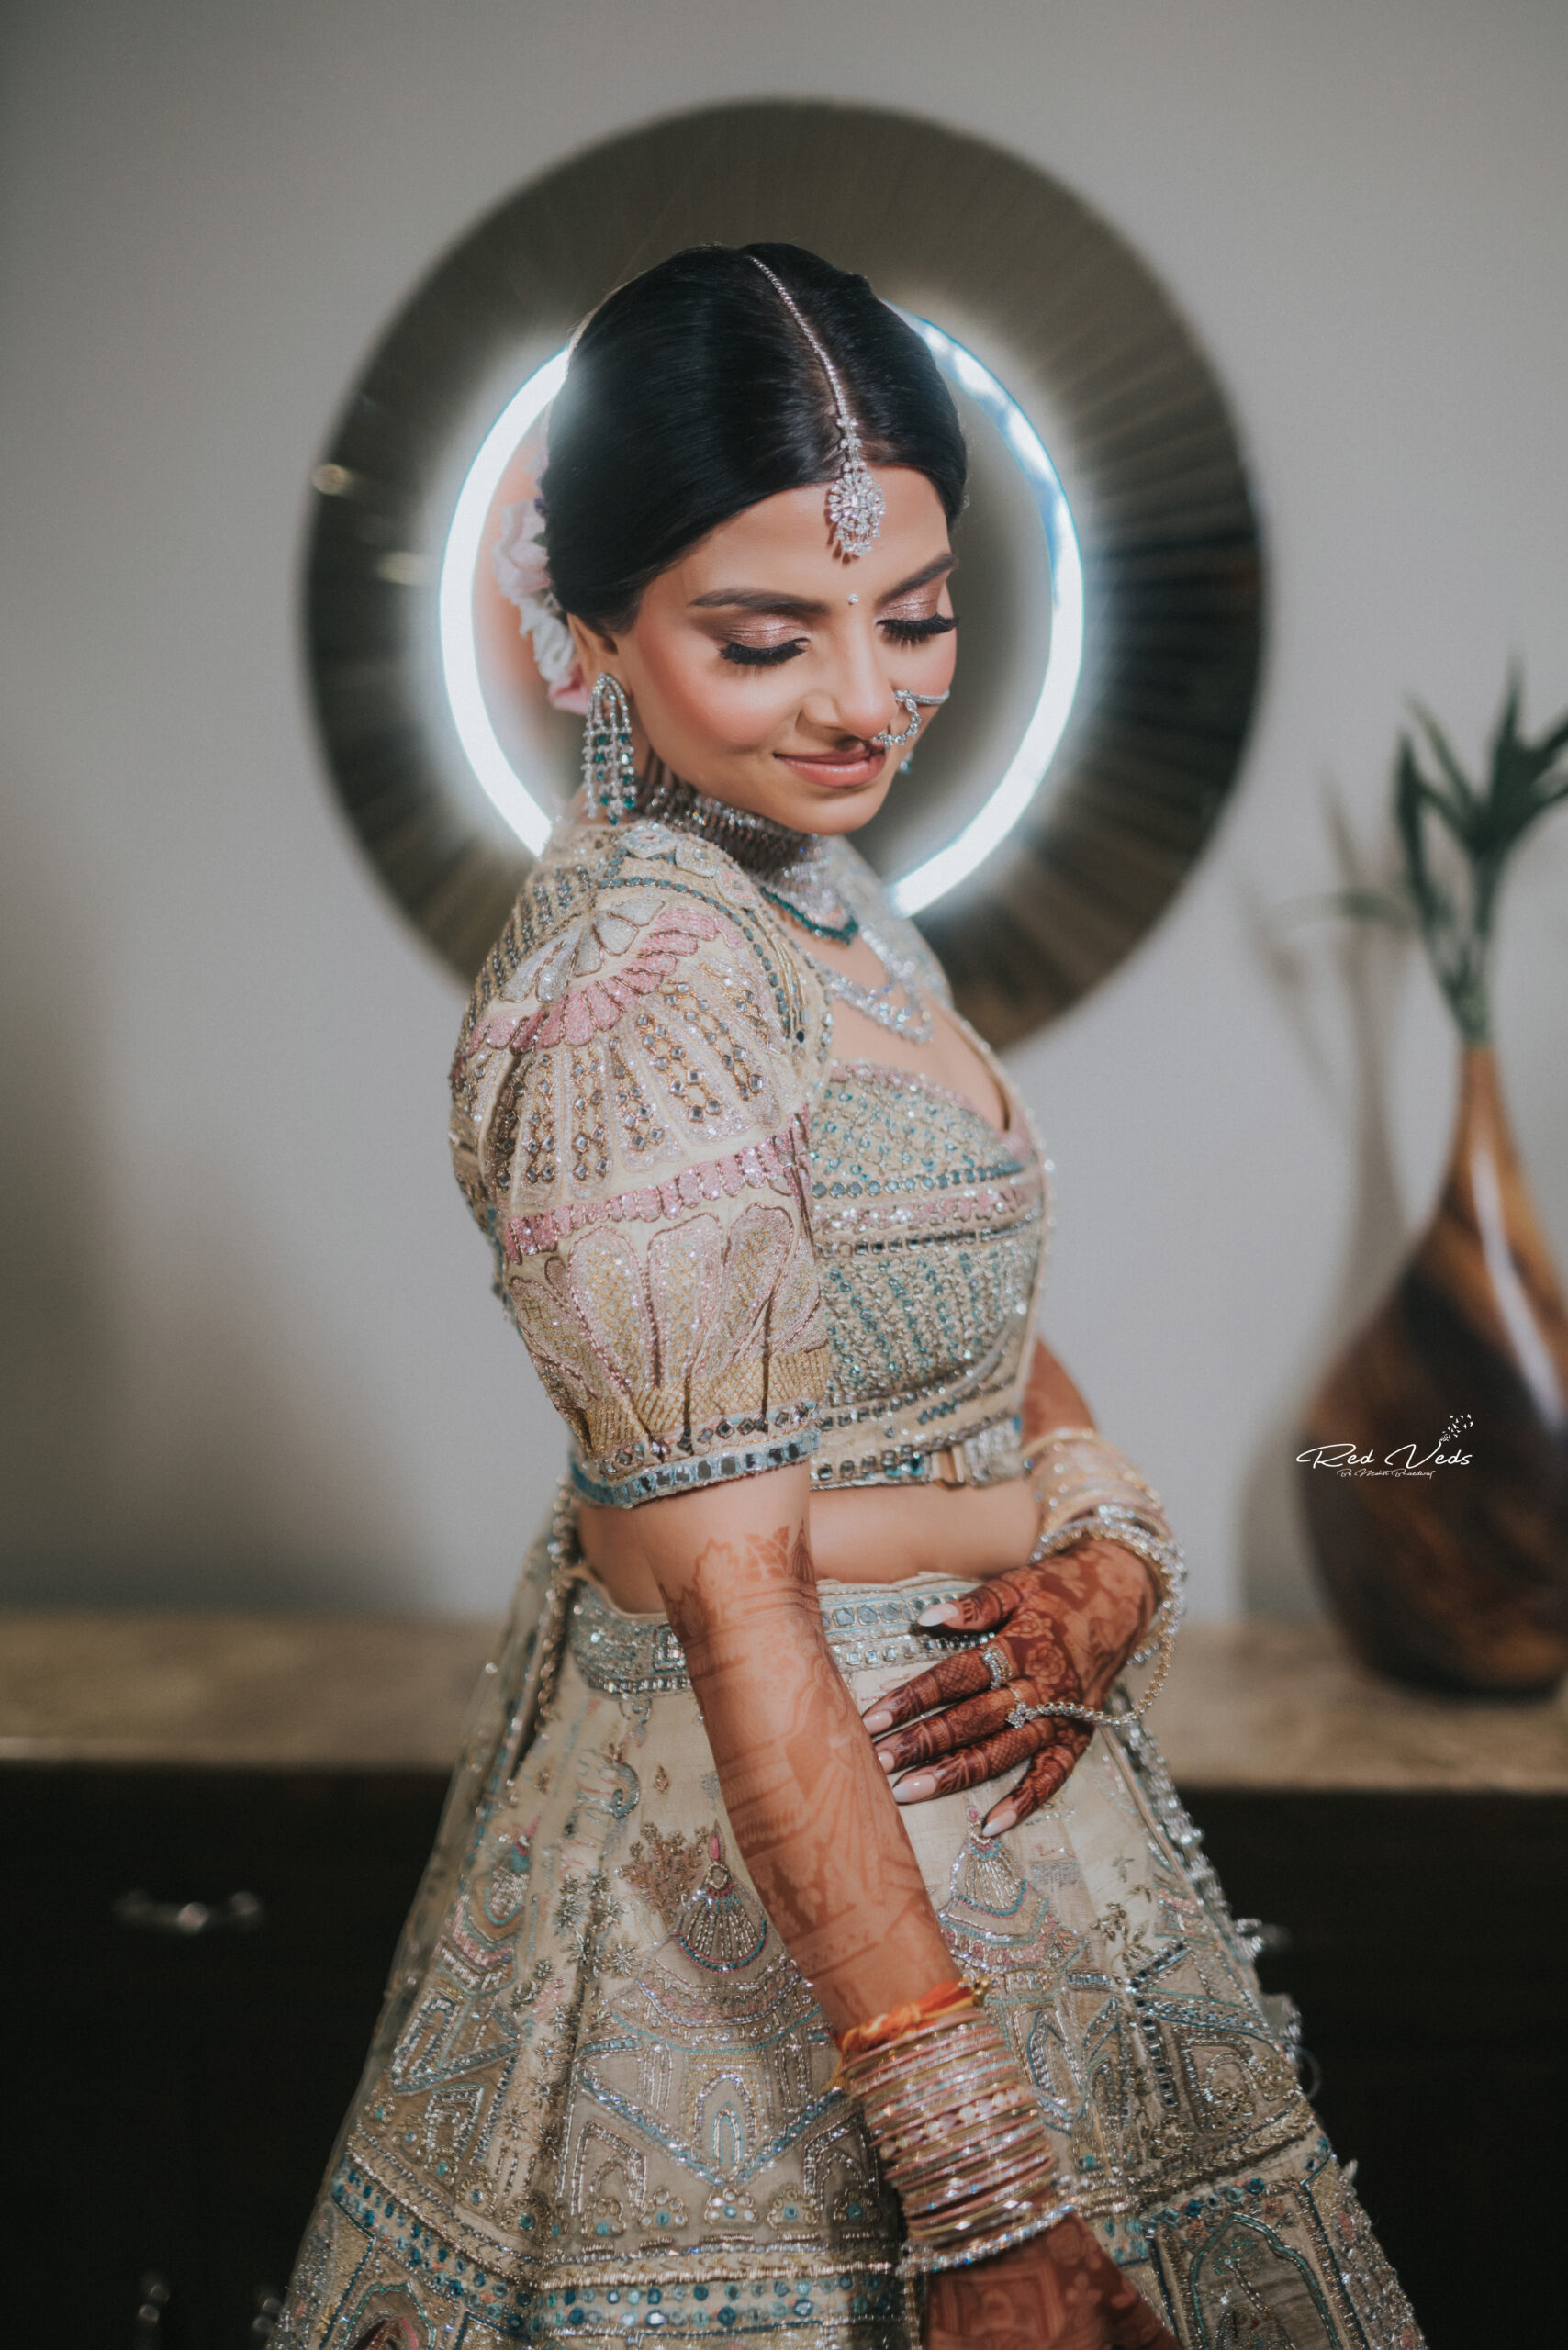 Captivating Bride Poses for Wedding Photos Alone | Red Veds